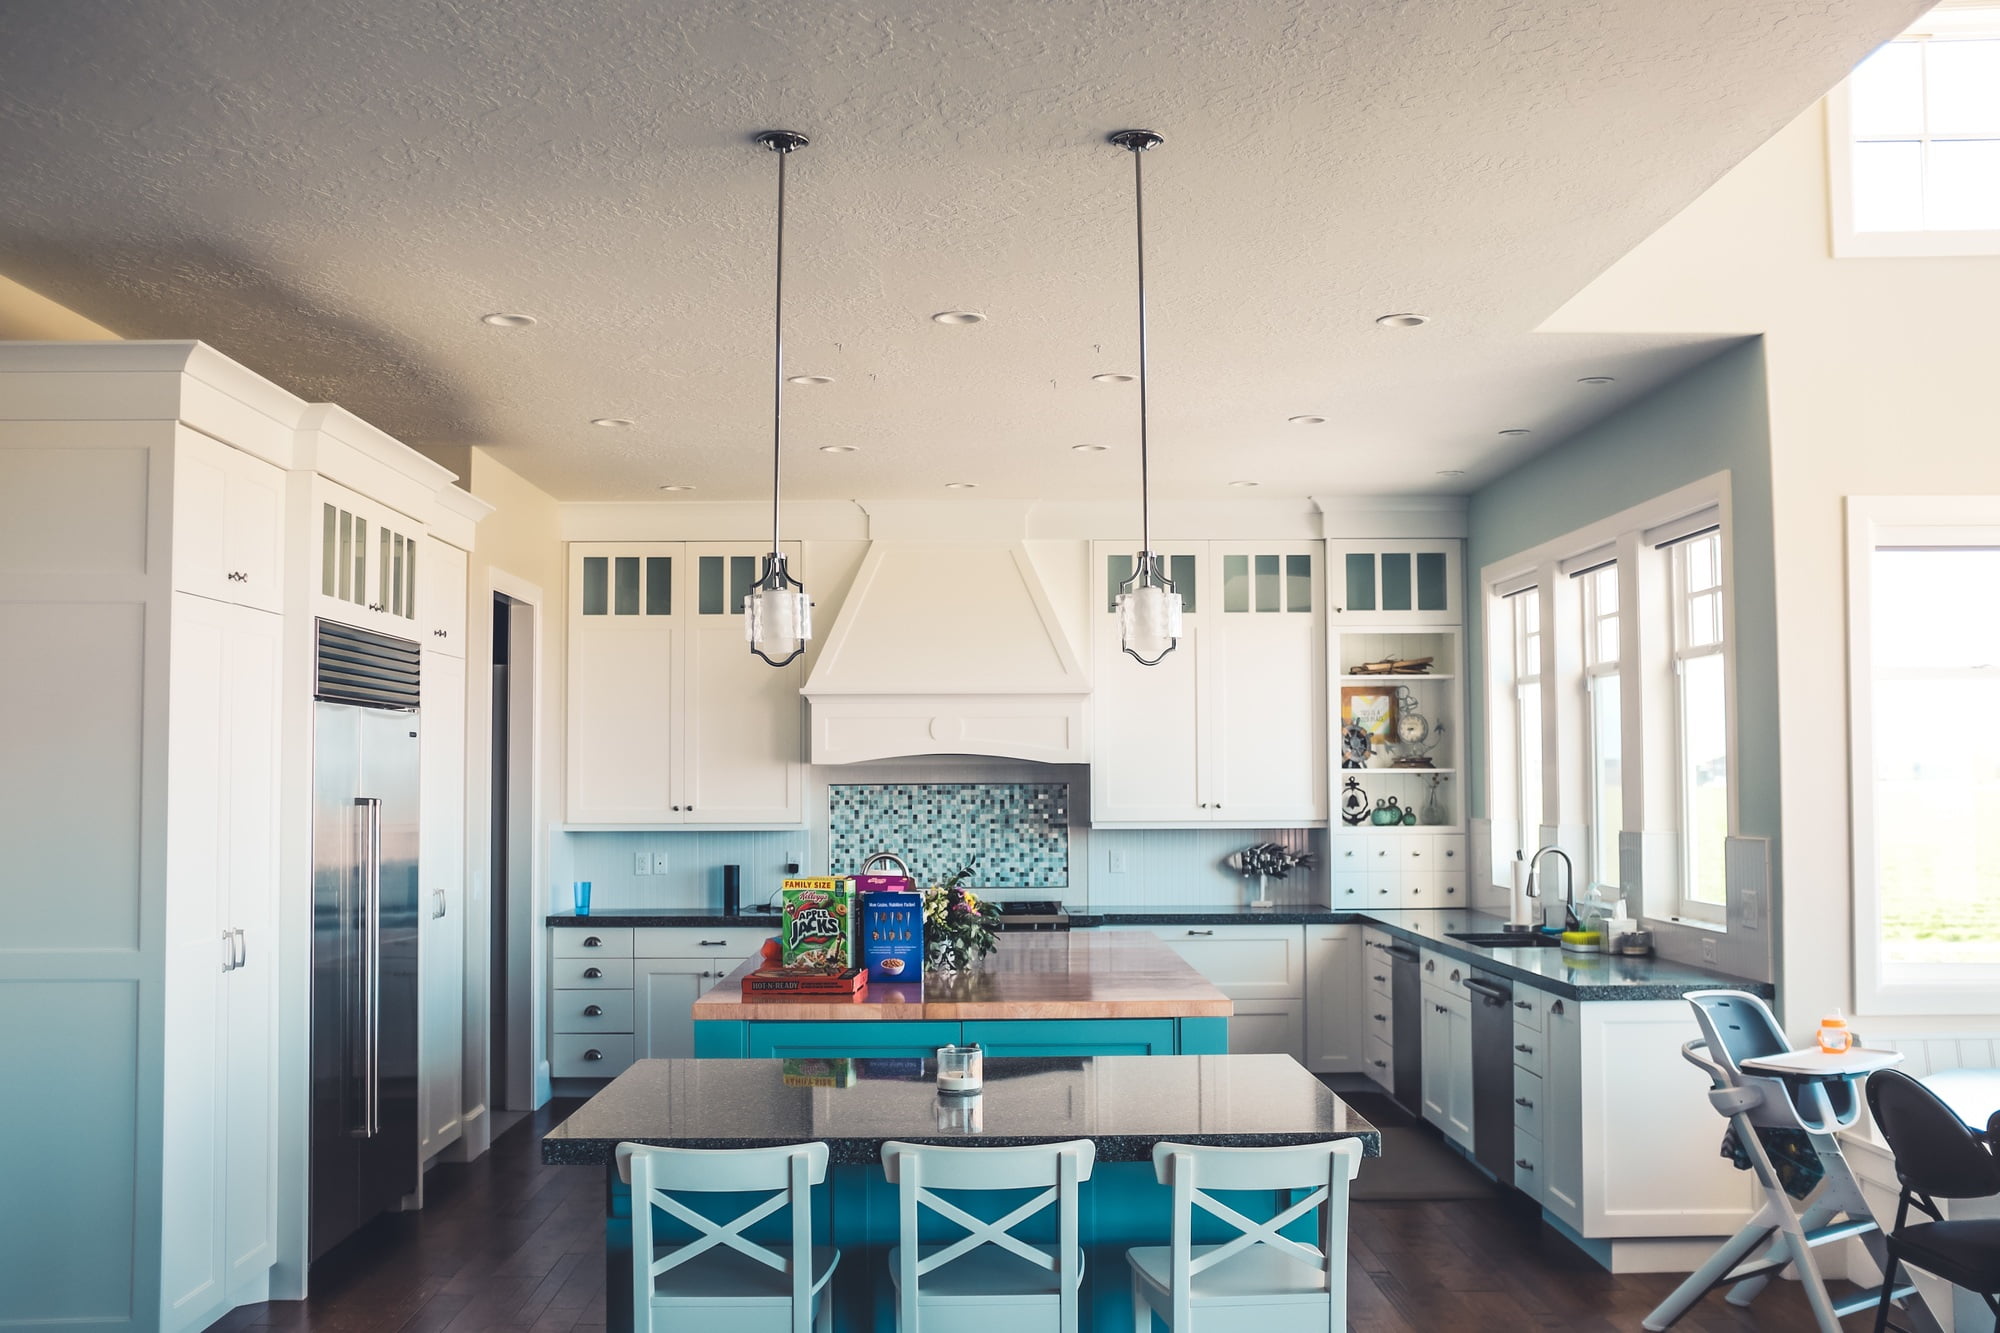 It's pretty easy to outgrow a kitchen. These key signs will tell you when a kitchen expansion might be smart. Learn here.